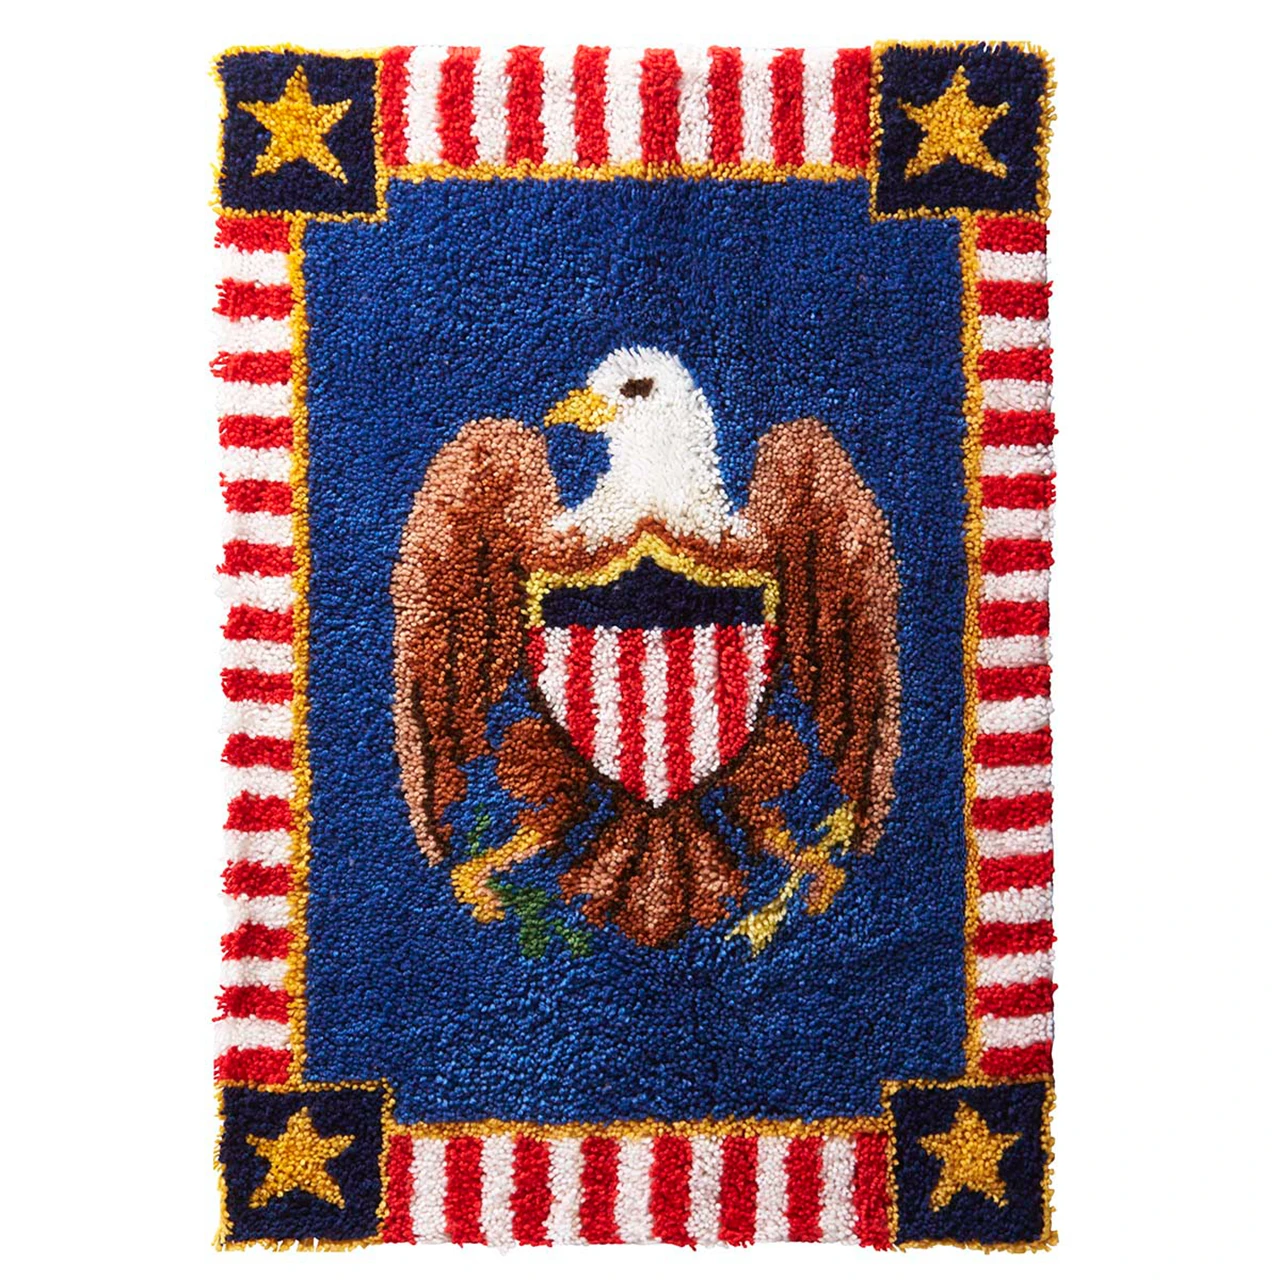 

Latch Hook Kits Eagle Patriotic Pride Wall Hanging DIY Carpet Rug Pre-Printed Canvas with Non-Skid Backing Floor Mat 69x102cm